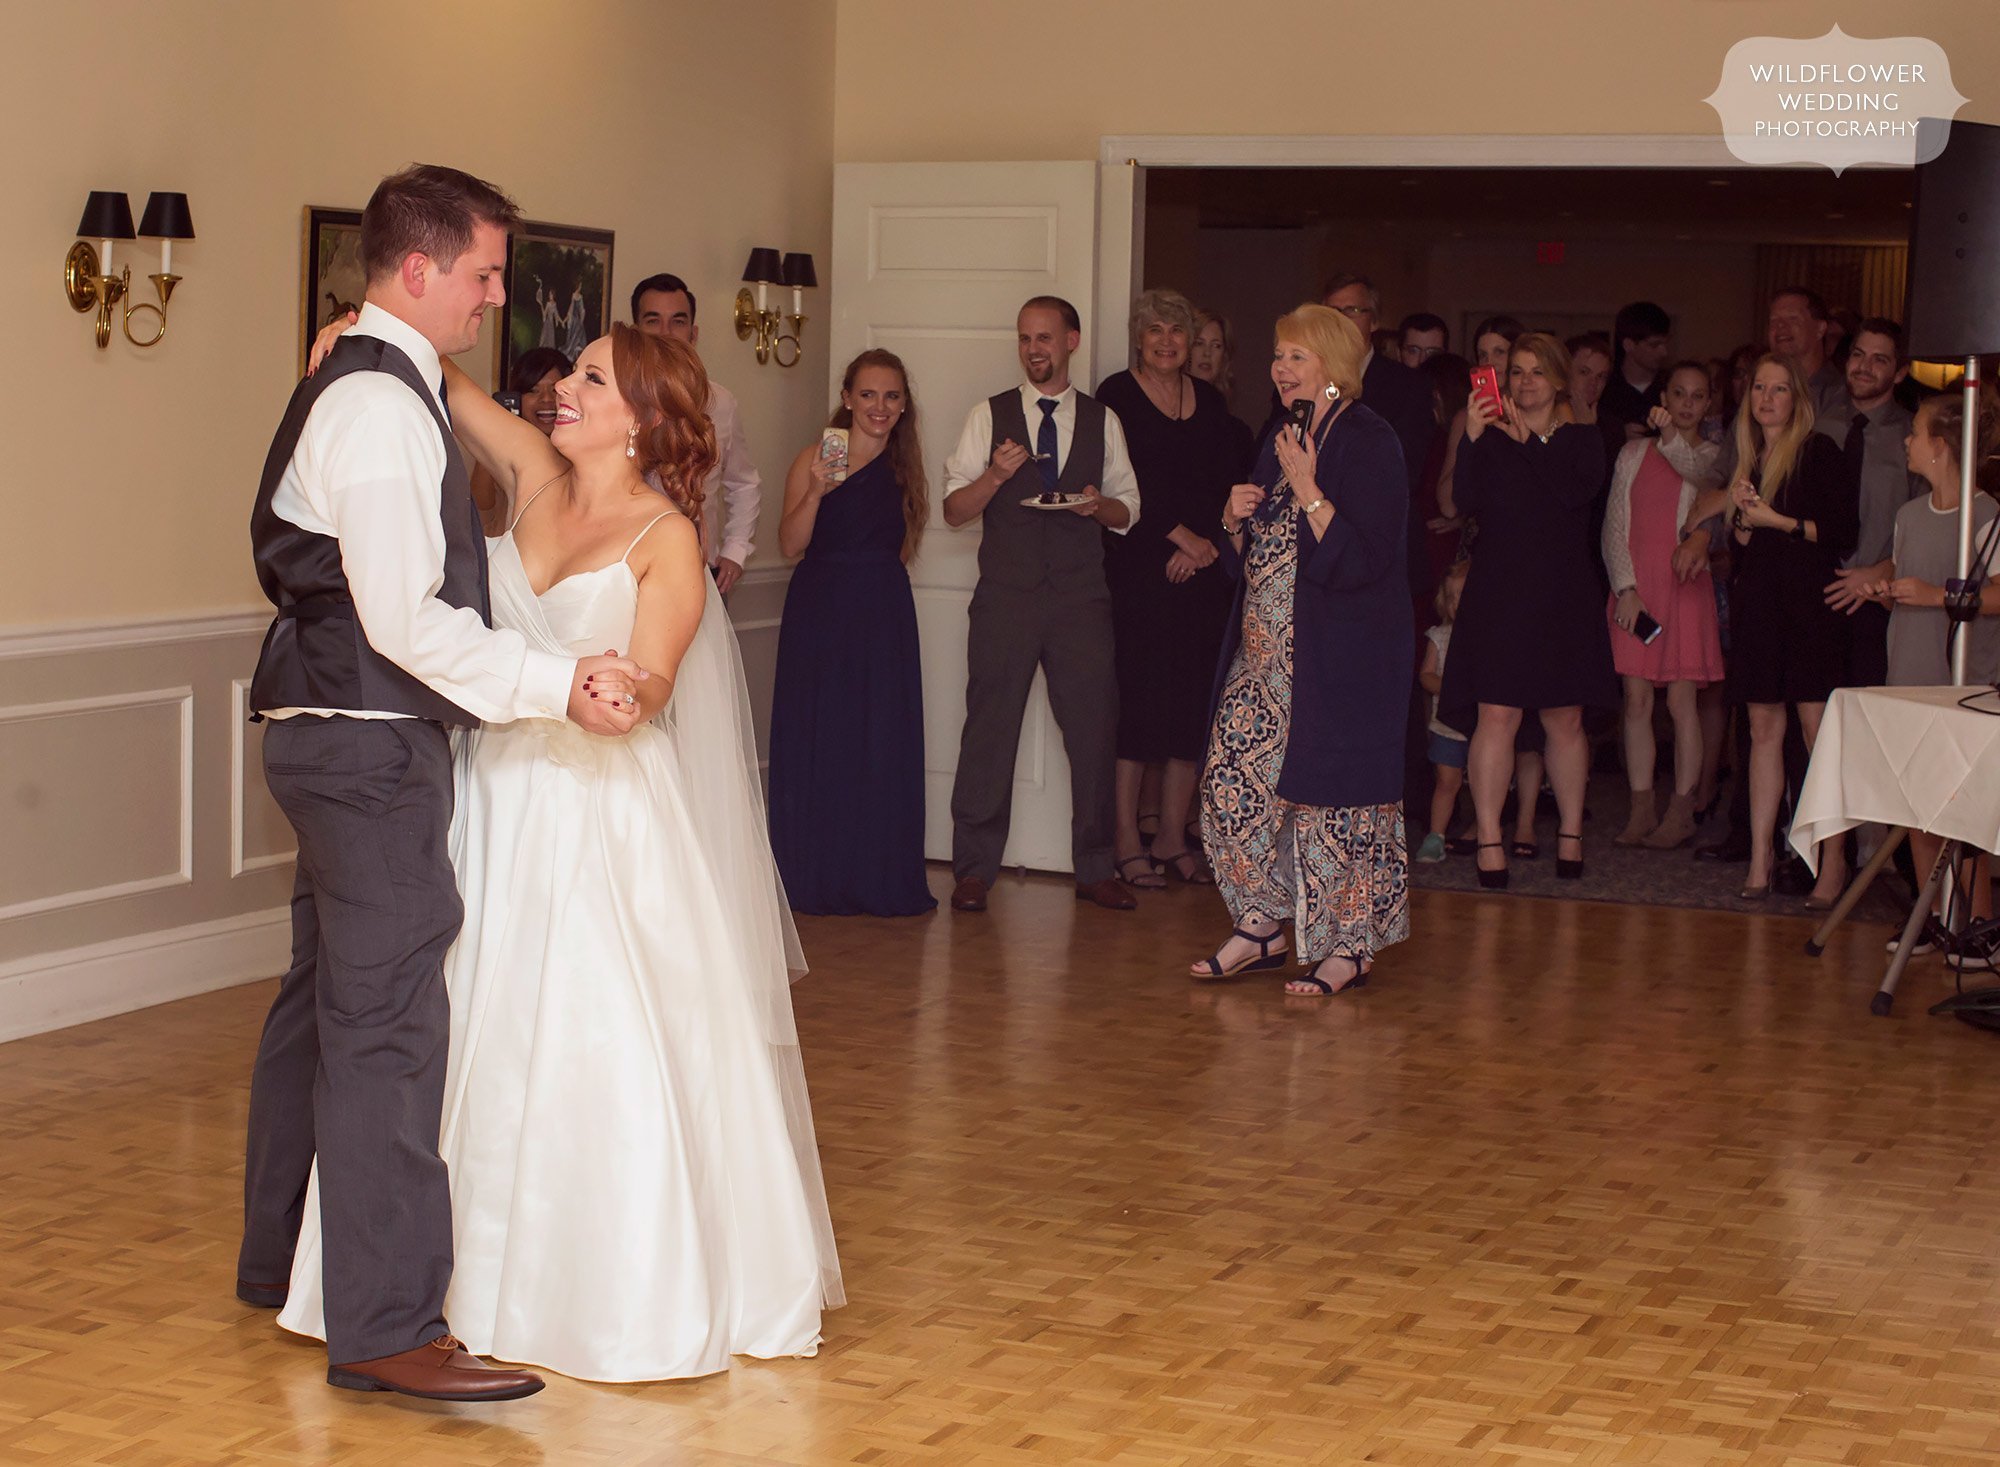 Romantic wedding dance of bride and groom at Jeff City Country Club.